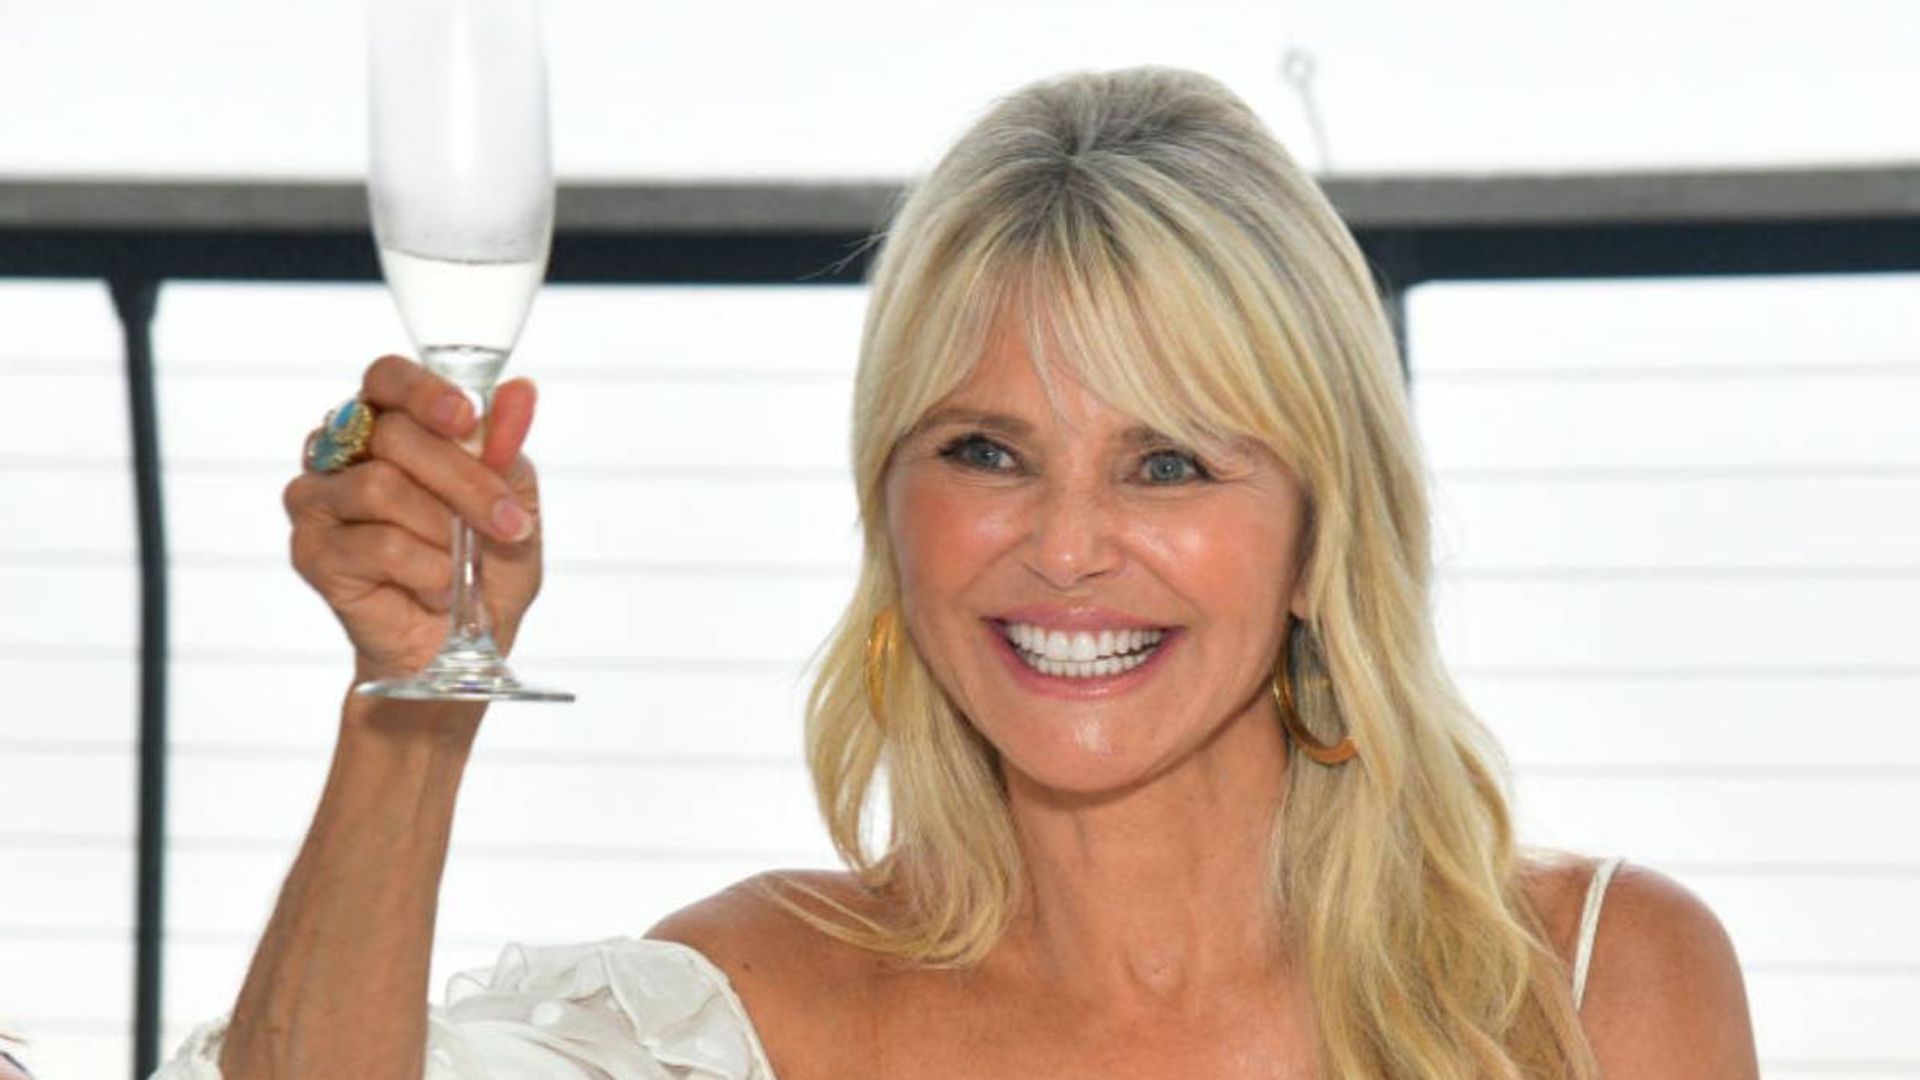 Christie Brinkley celebrates love with beachside photos ahead of friend's nuptials